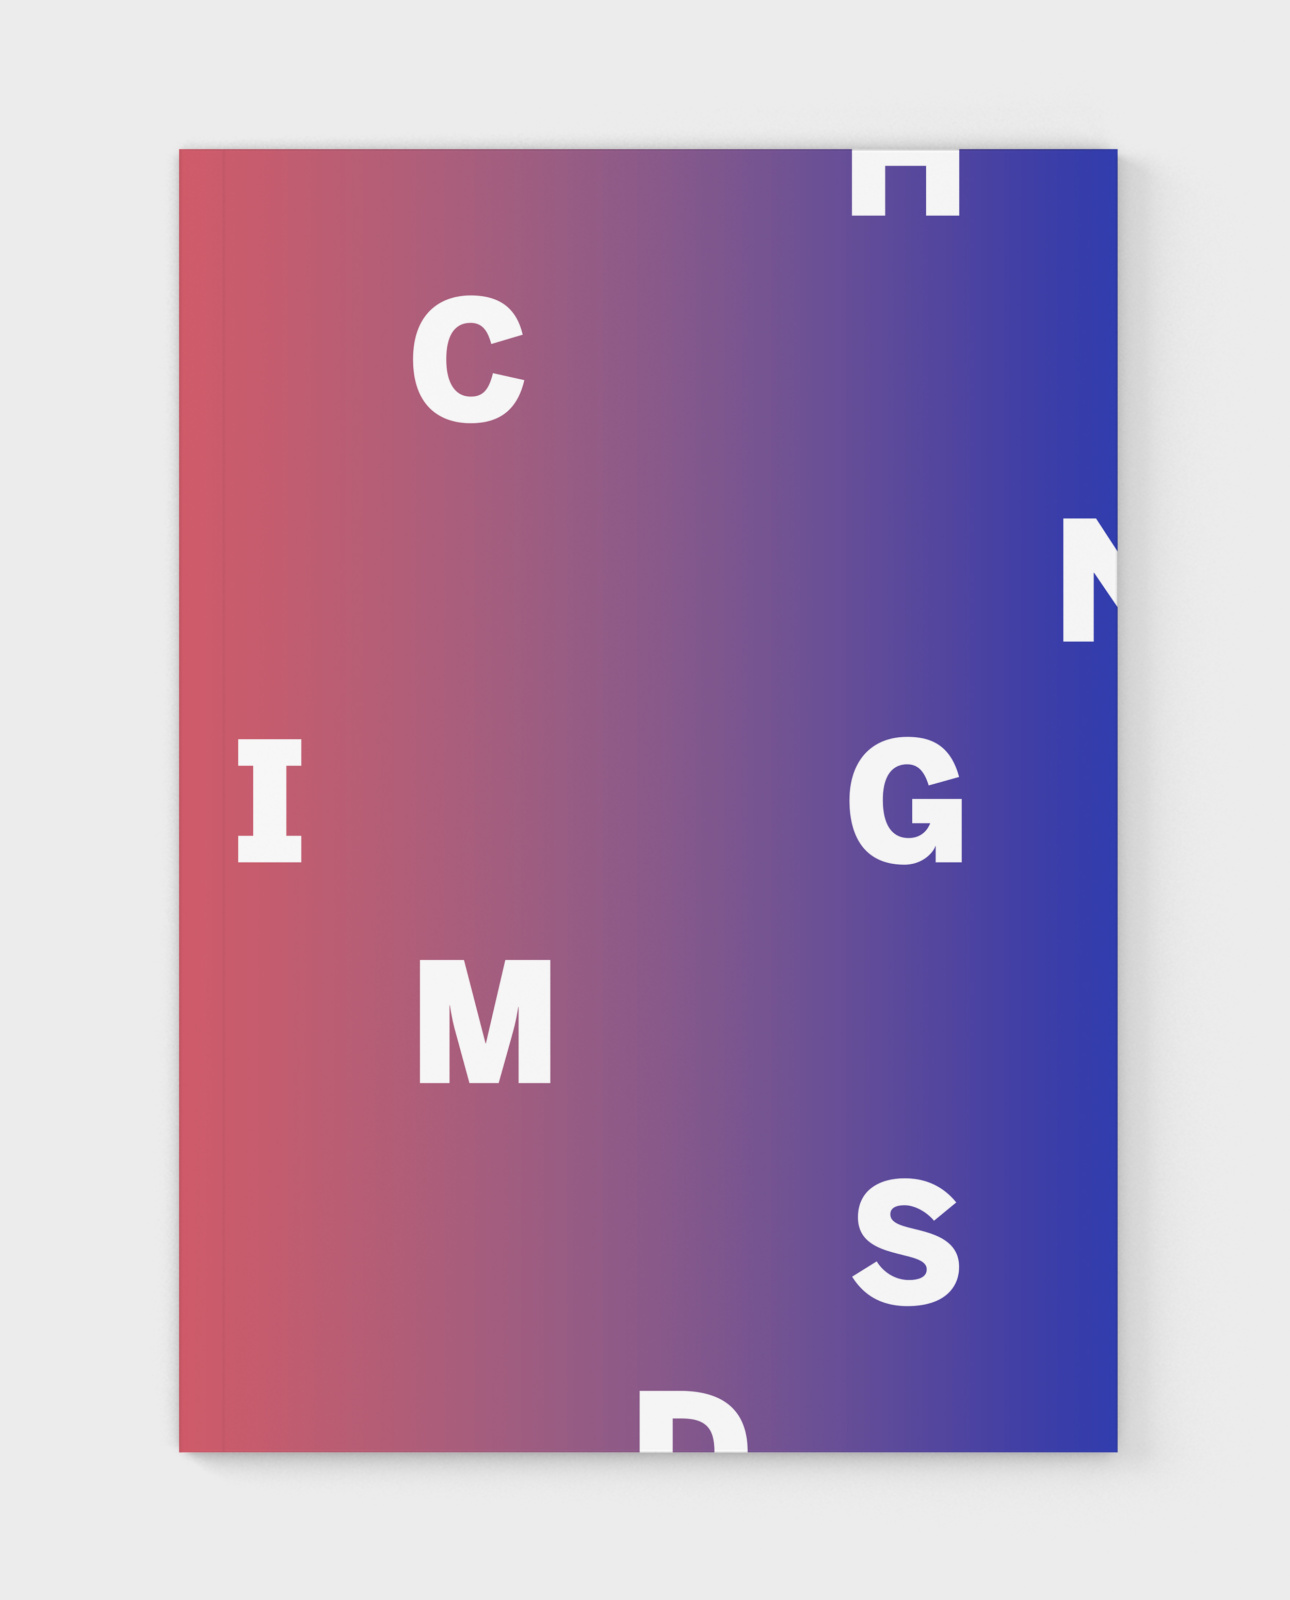 Front cover of the Changing Minds annual report design for The George Gund Foundation, with gradient and abstract typography